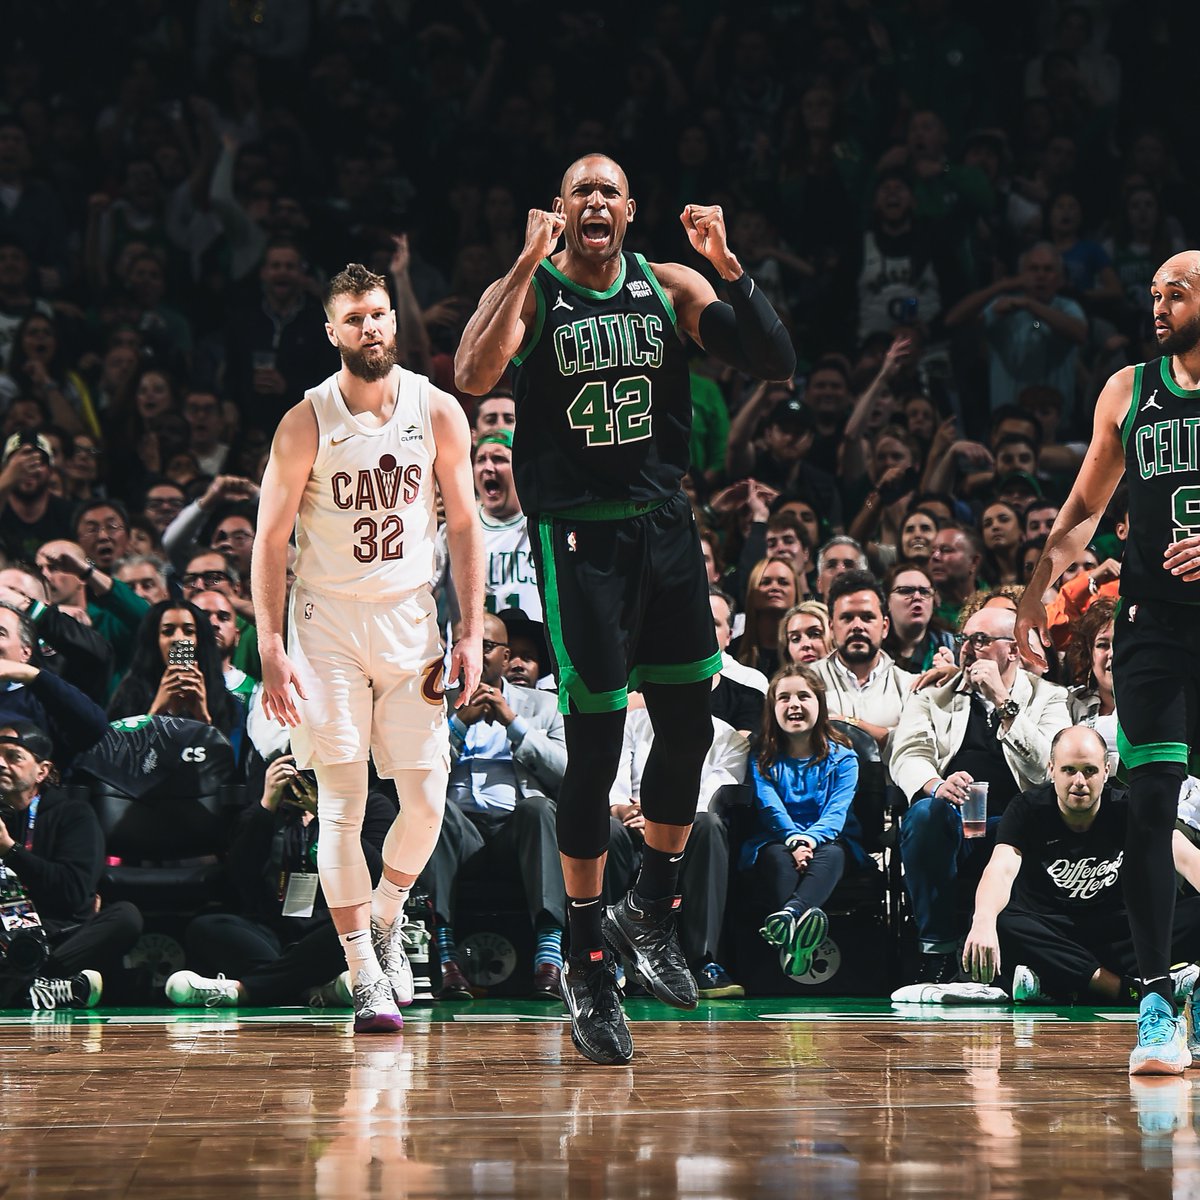 How we feeling, Celtics Nation!!?!!?

#DifferentHere